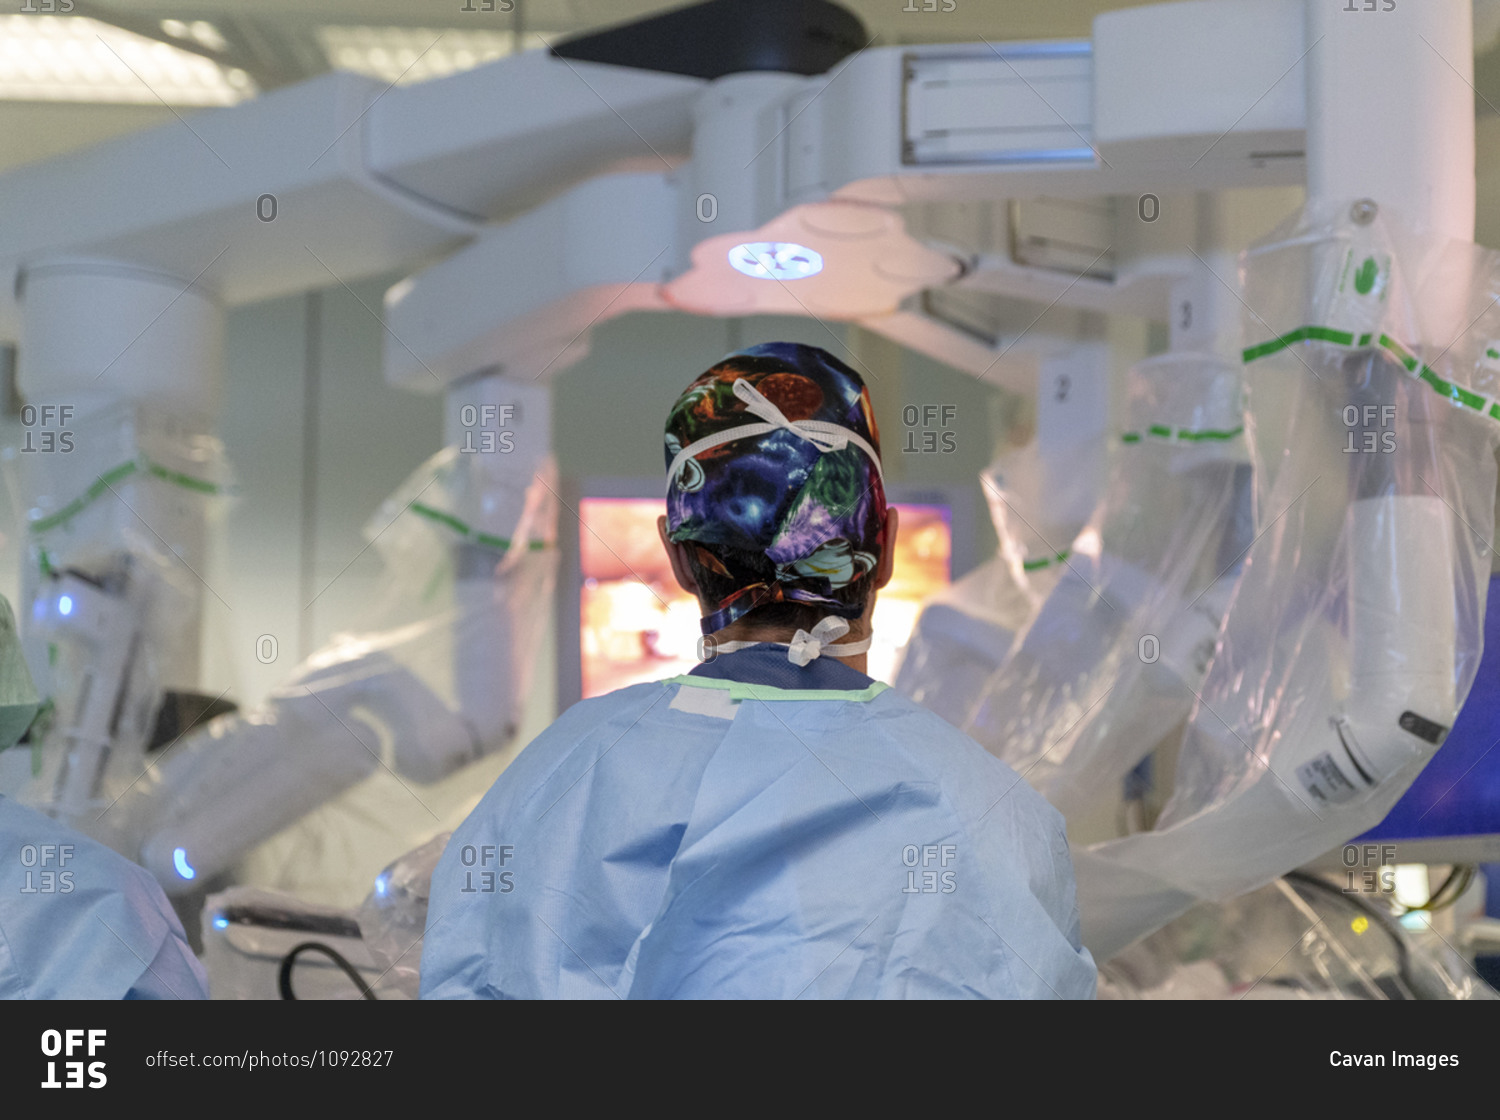 A surgeon stands in front of a robot operating a patient